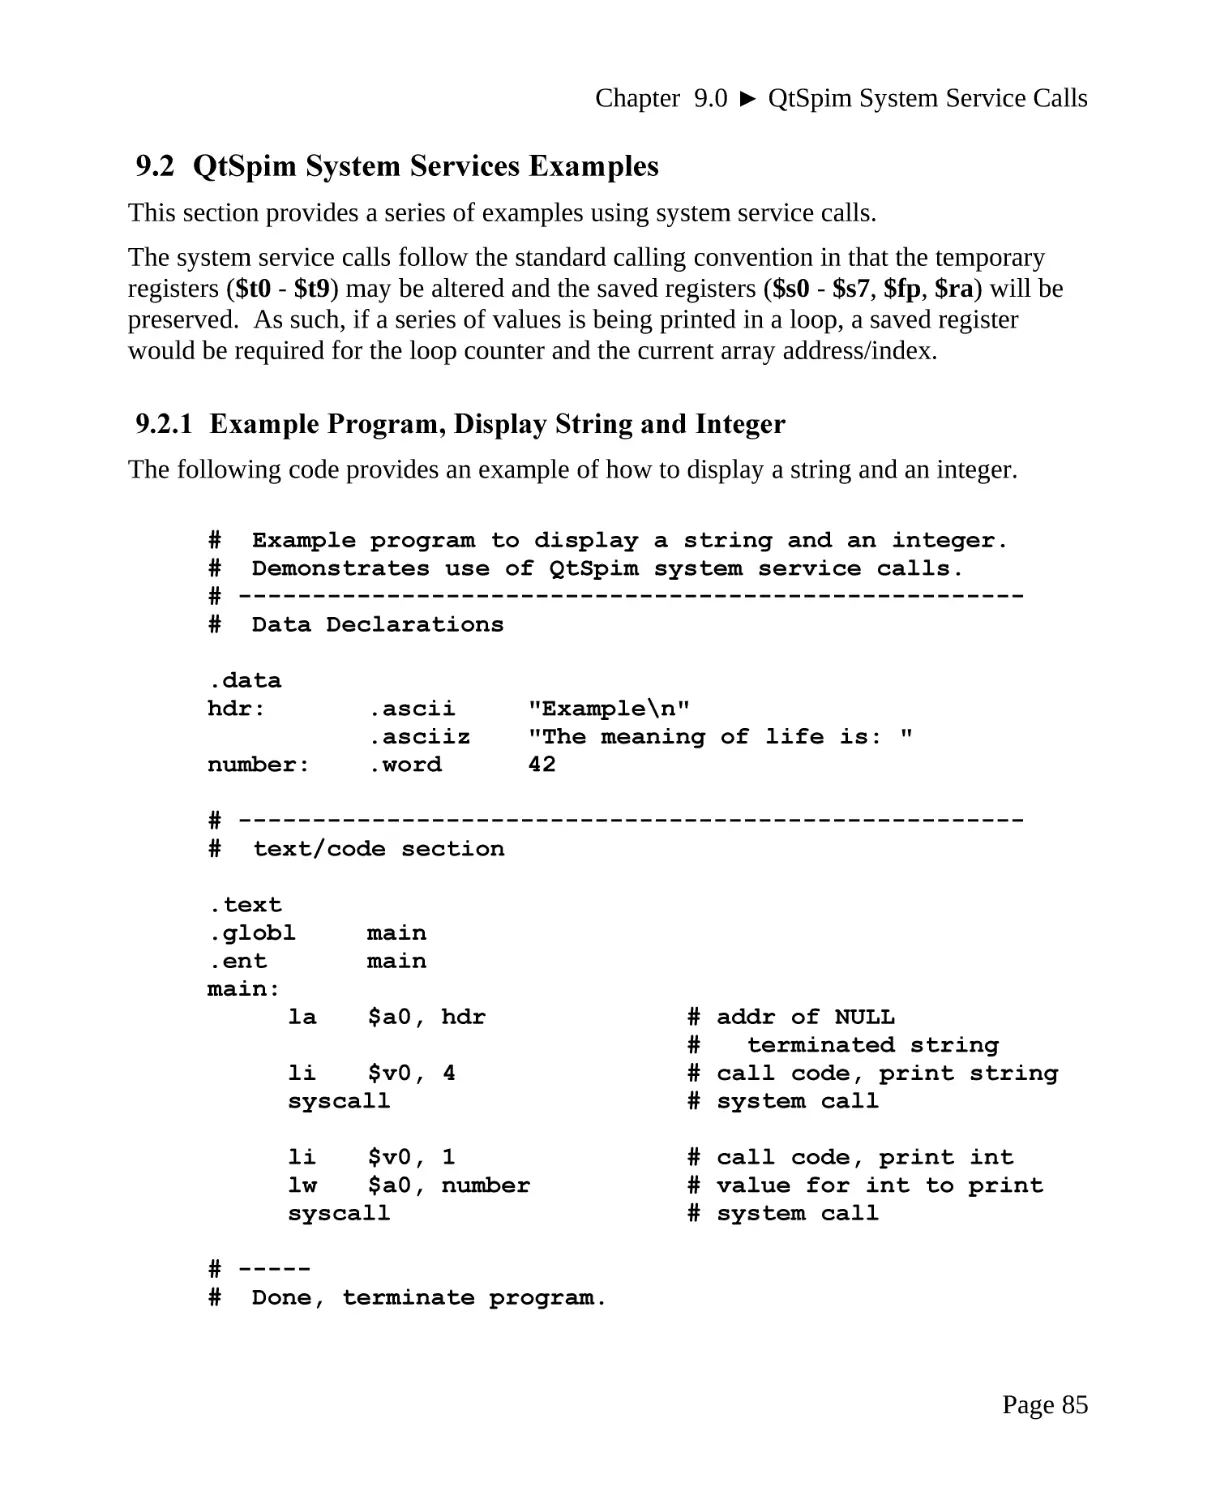 9.2 QtSpim System Services Examples
9.2.1 Example Program, Display String and Integer